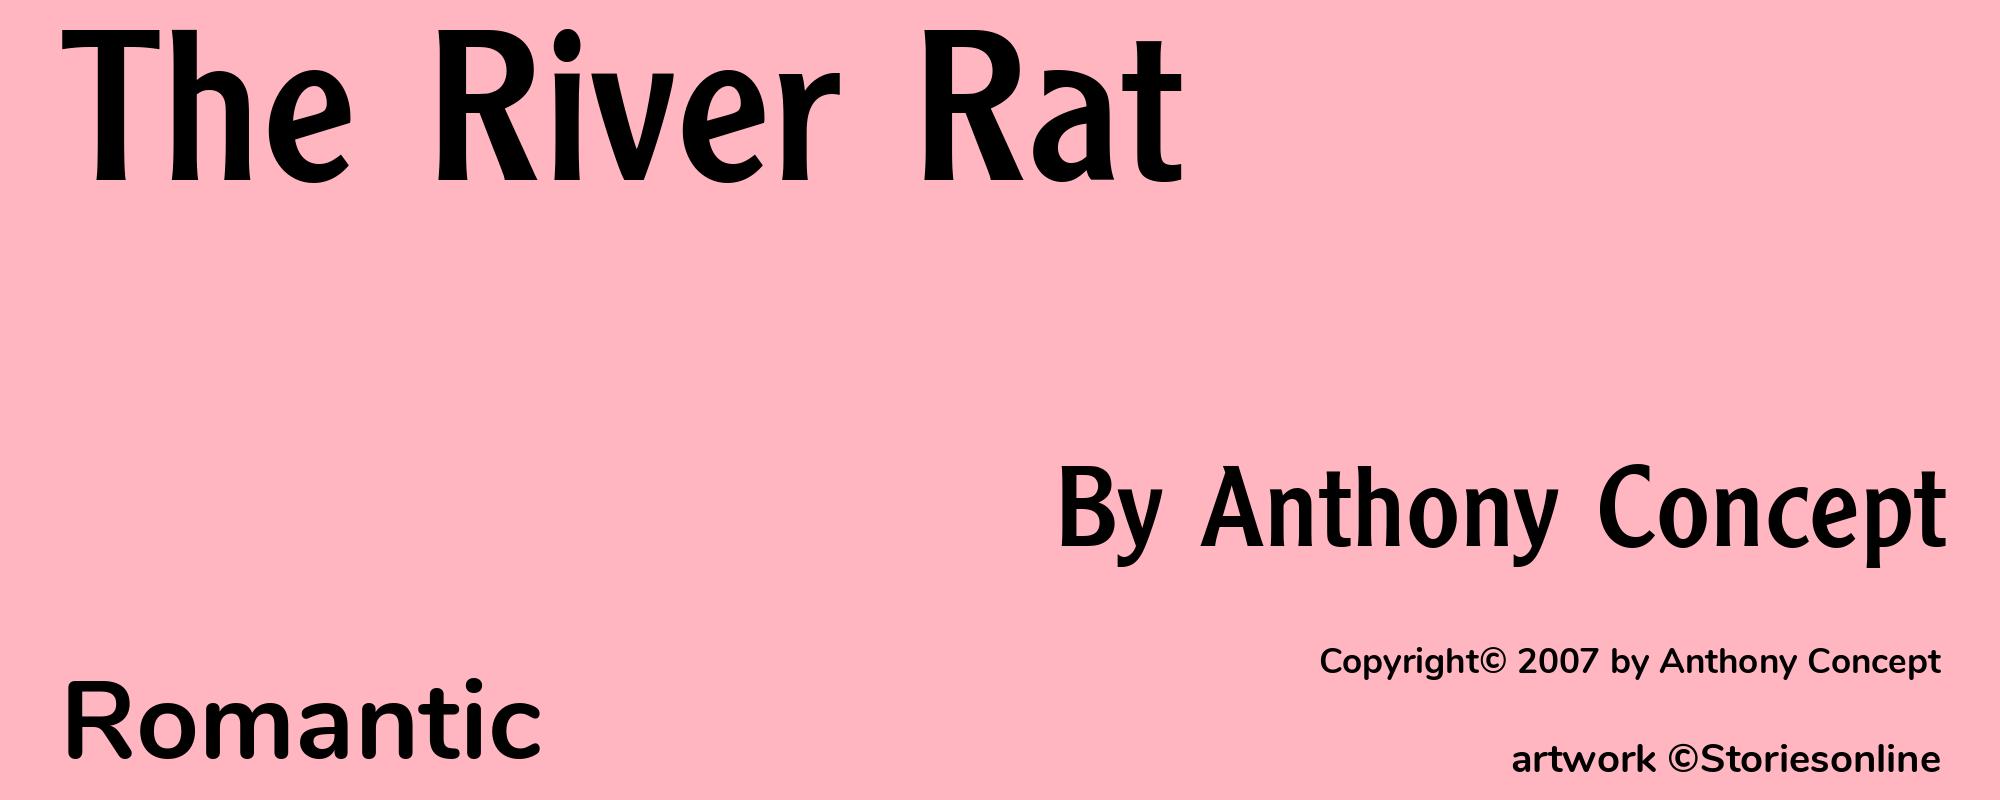 The River Rat - Cover